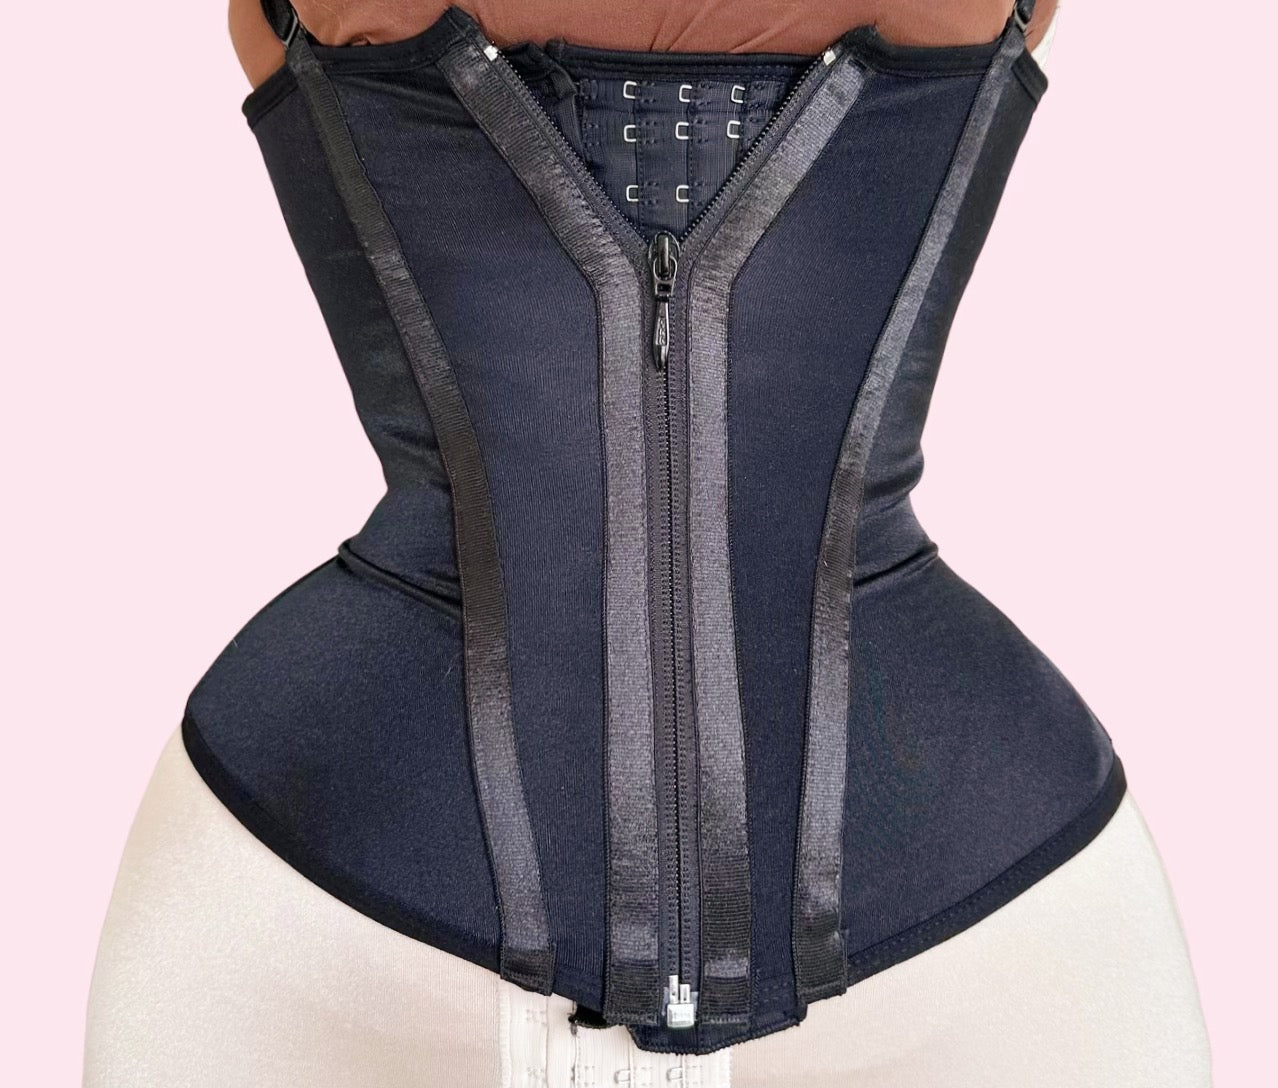 Youloveit Aist Trainer Corset Breathable And Invisible Waist